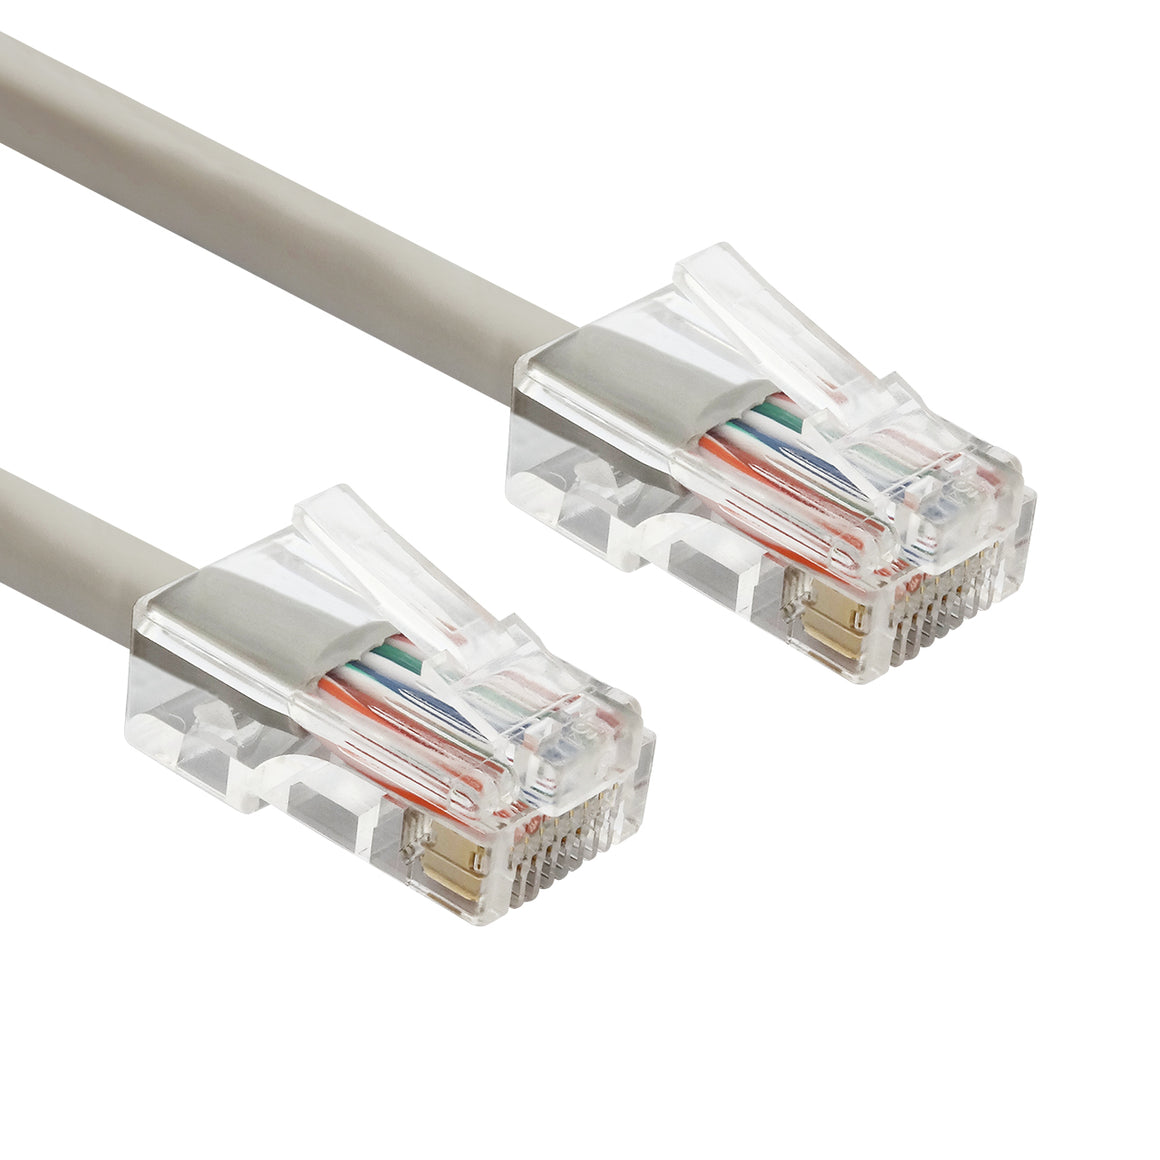 non-booted rj45 cat5e ethernet network patch cable gray